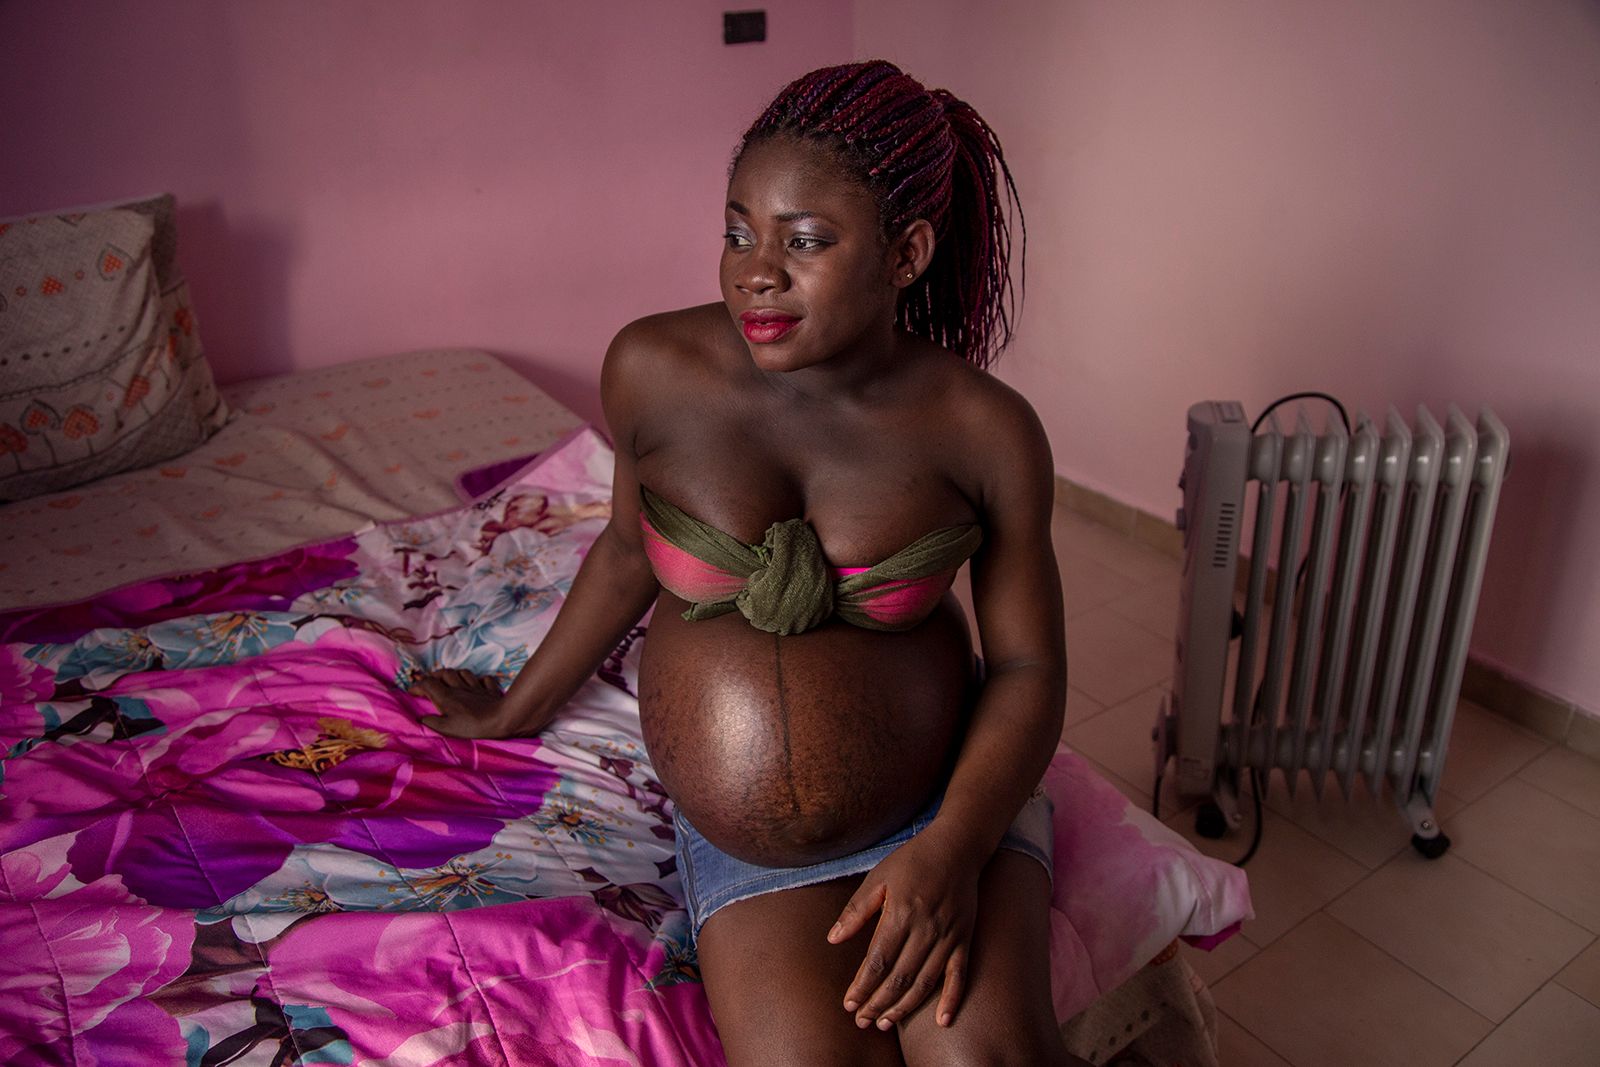 © Alessio Paduano - A pregnant girl is seen in her bedroom in Castelvolturno, Southern Italy on May 27, 2018.